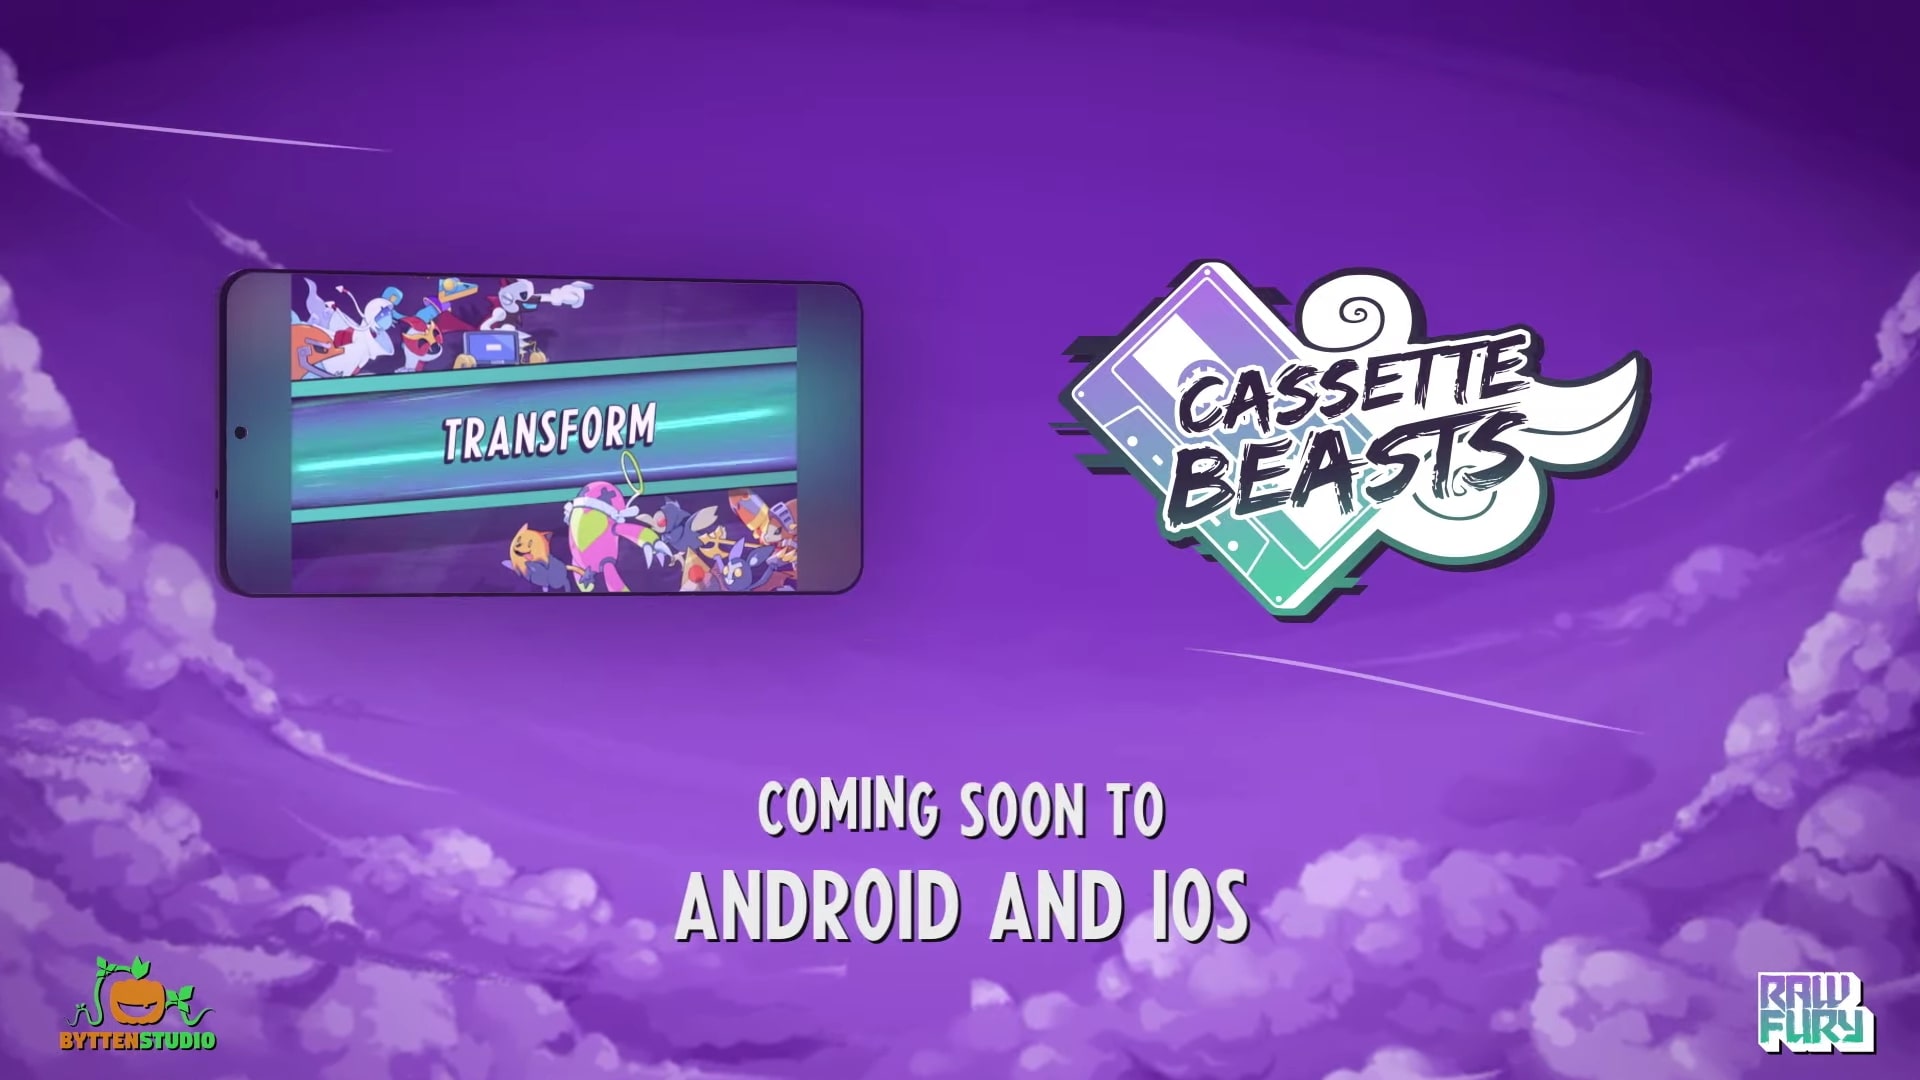 "Cassette Beasts" Is Bringing Transformative Adventures to Mobile Platforms!